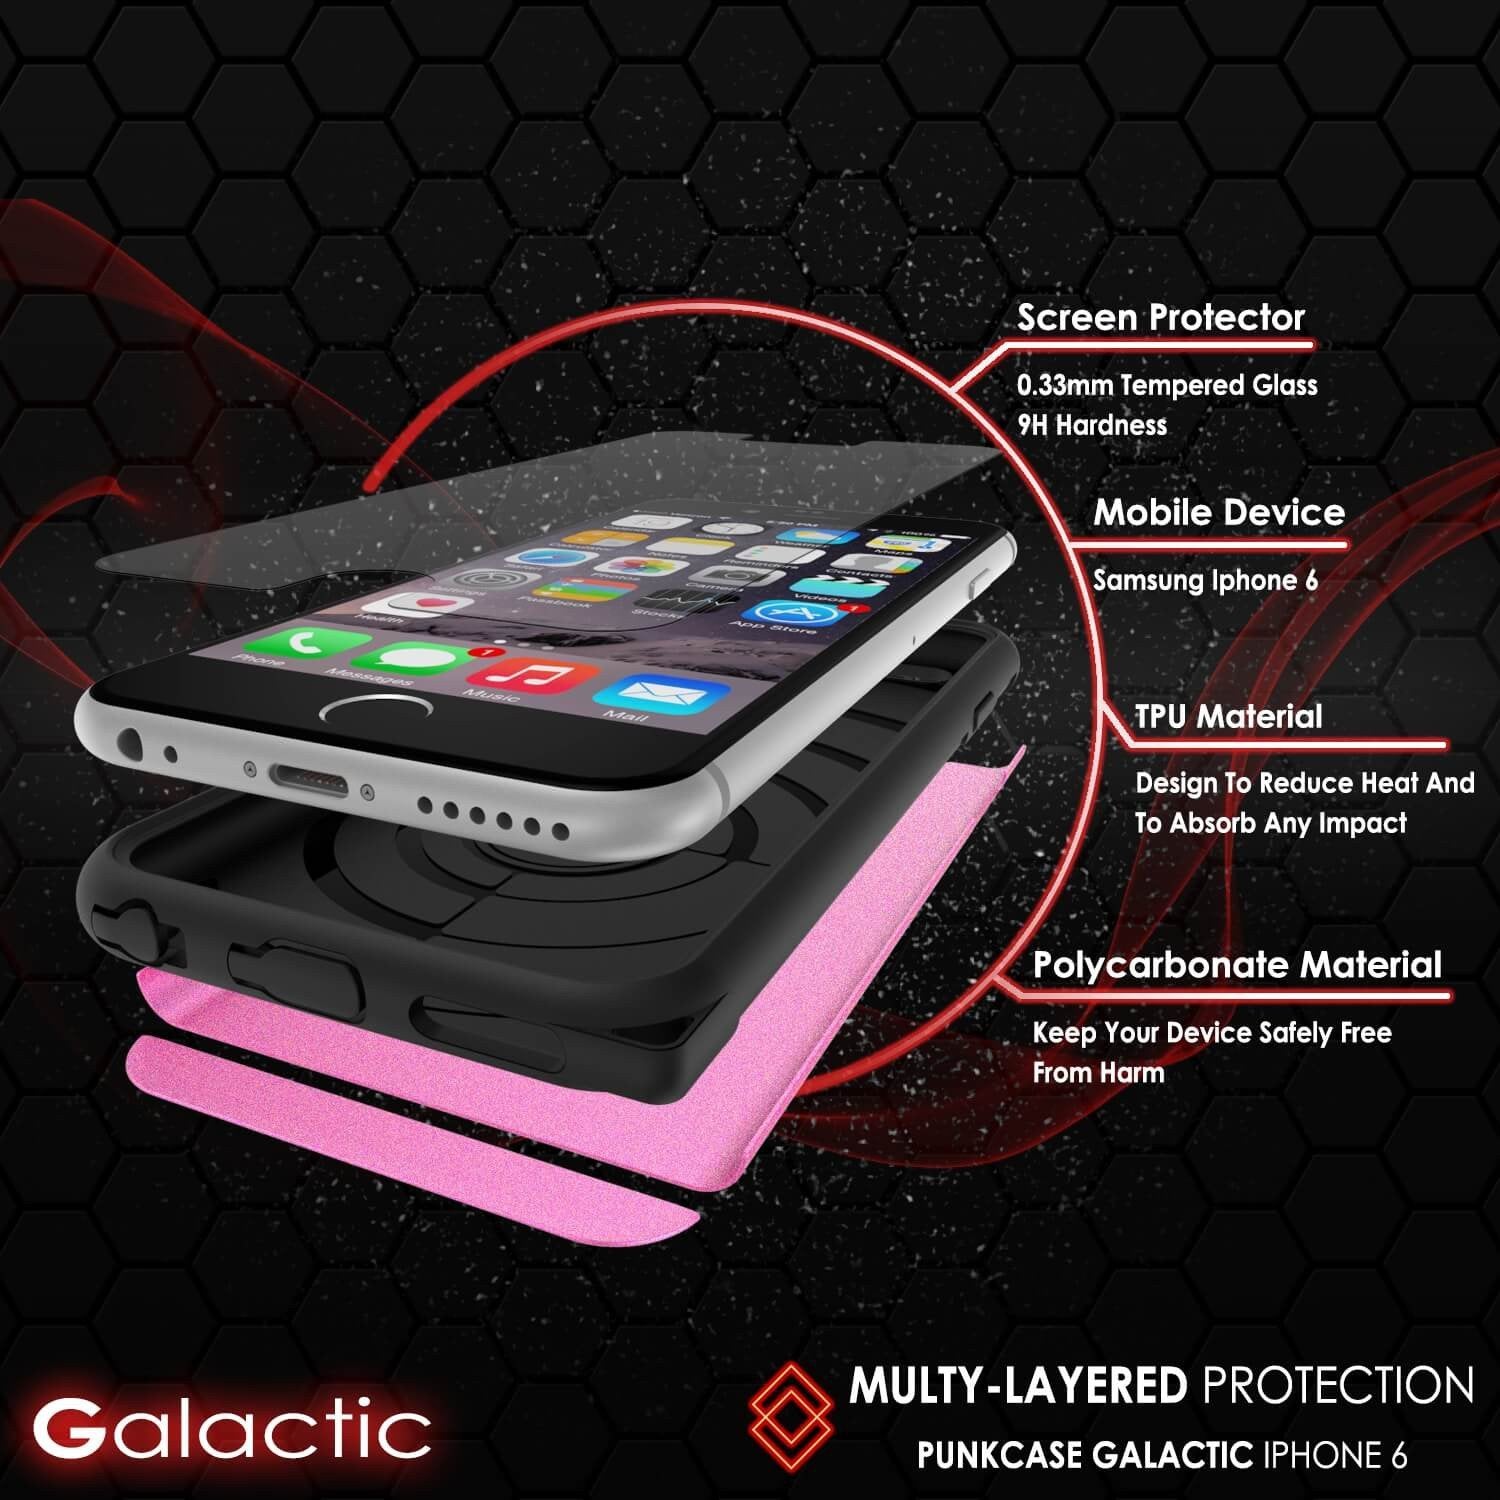 iPhone 6s Plus/6 Plus Case PunkCase Galactic Pink Slim w/ Tempered Glass Protector Lifetime Warranty